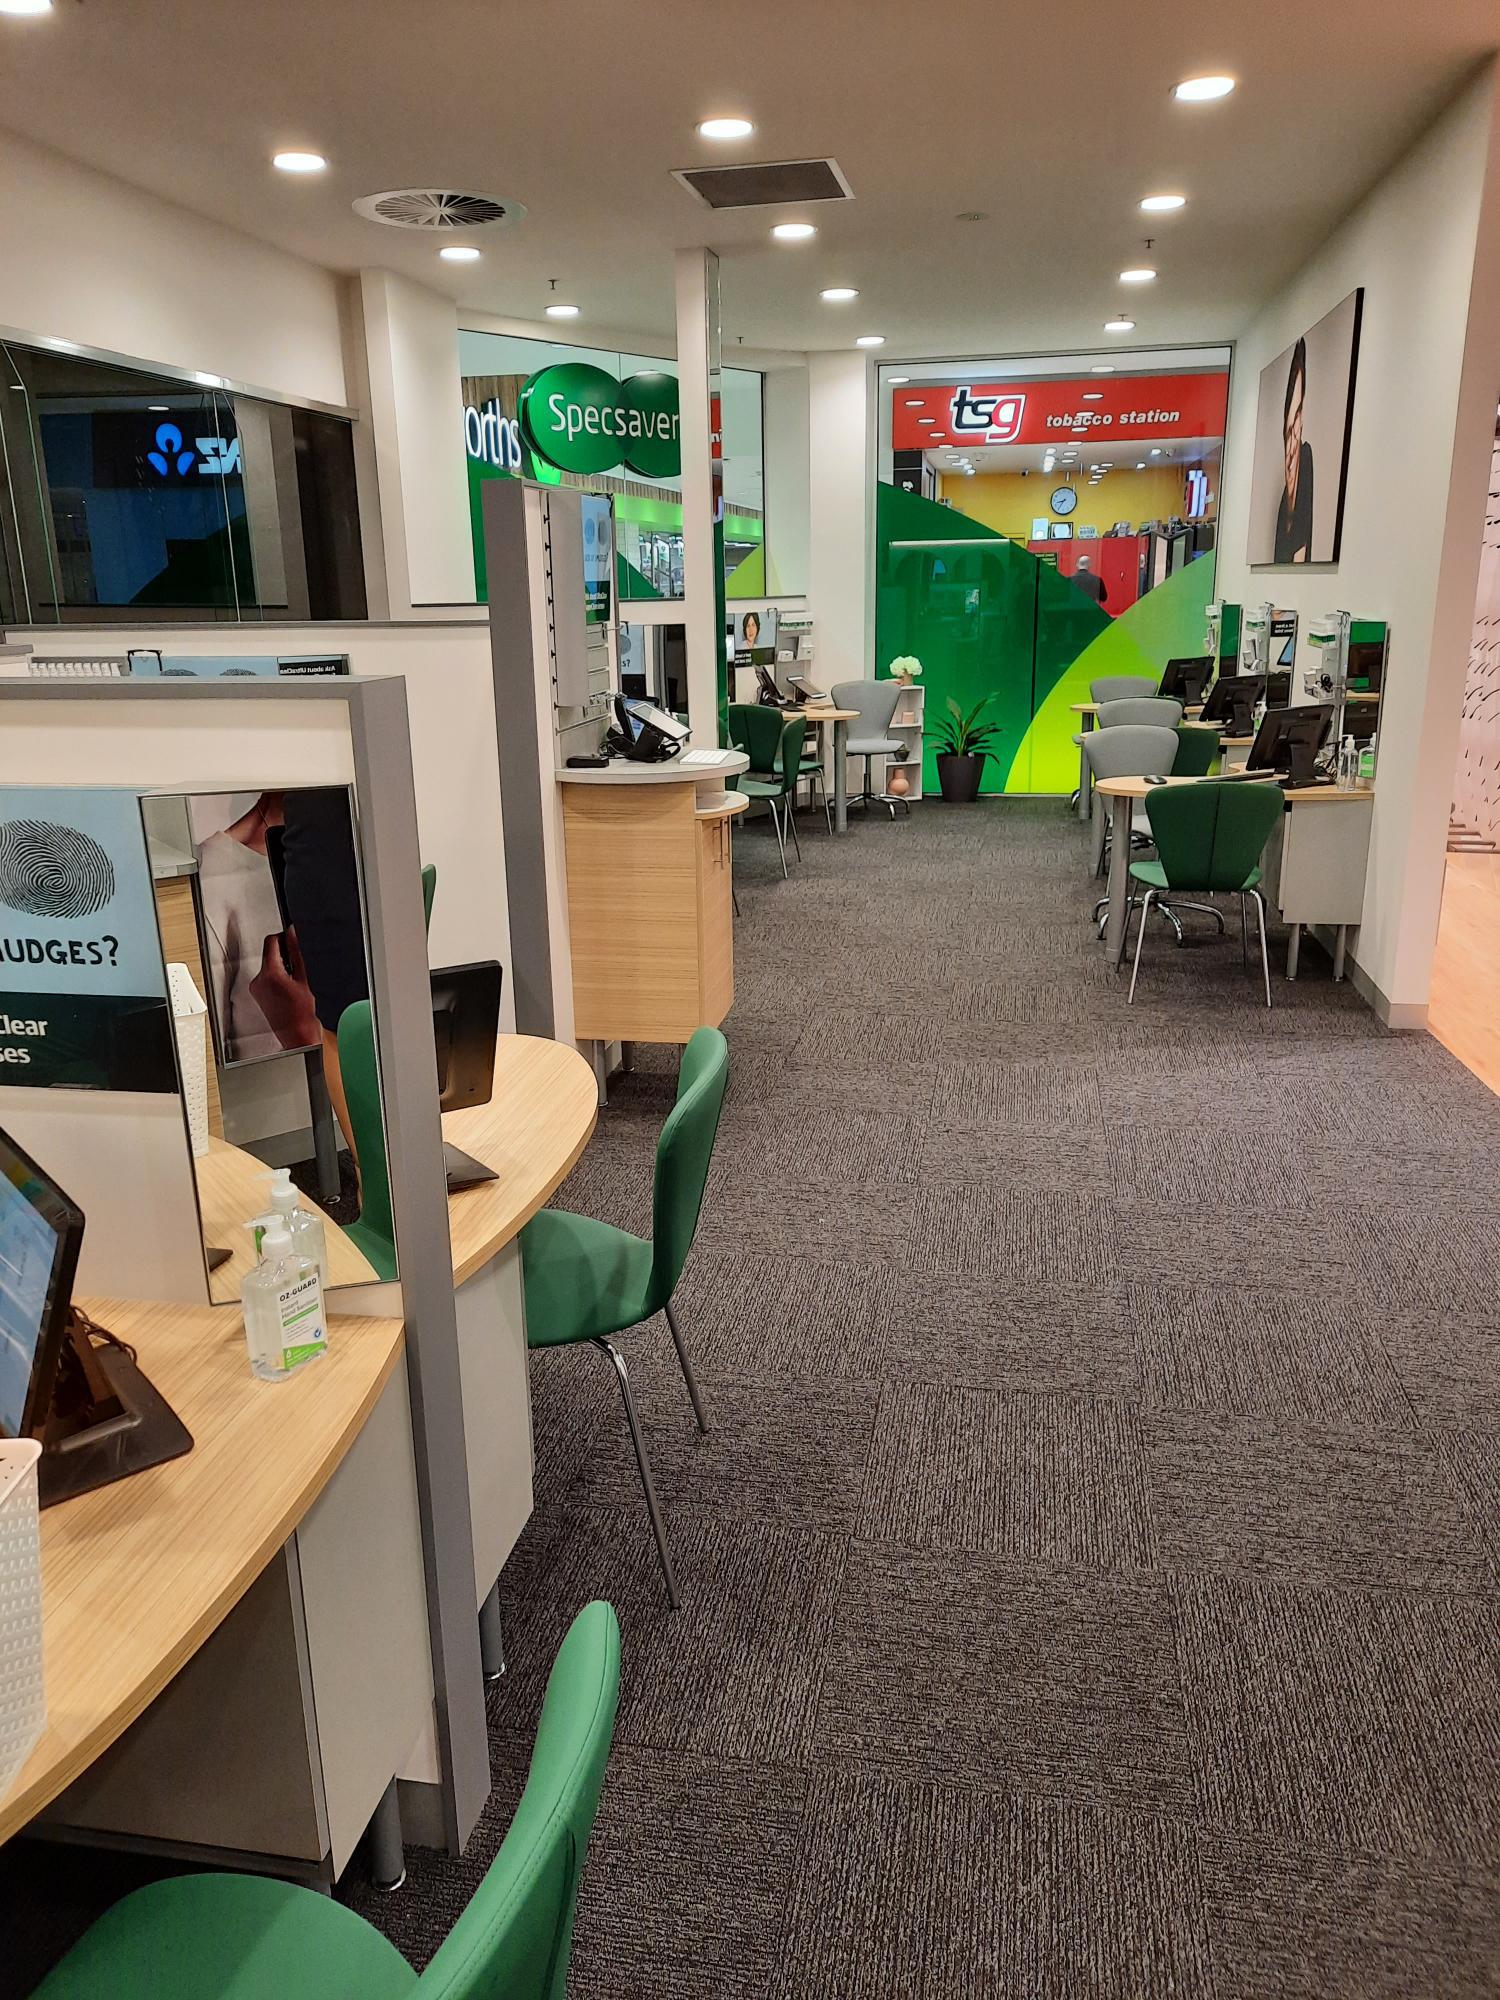 Images Specsavers Optometrists & Audiology - Rosny Park Eastlands S/C